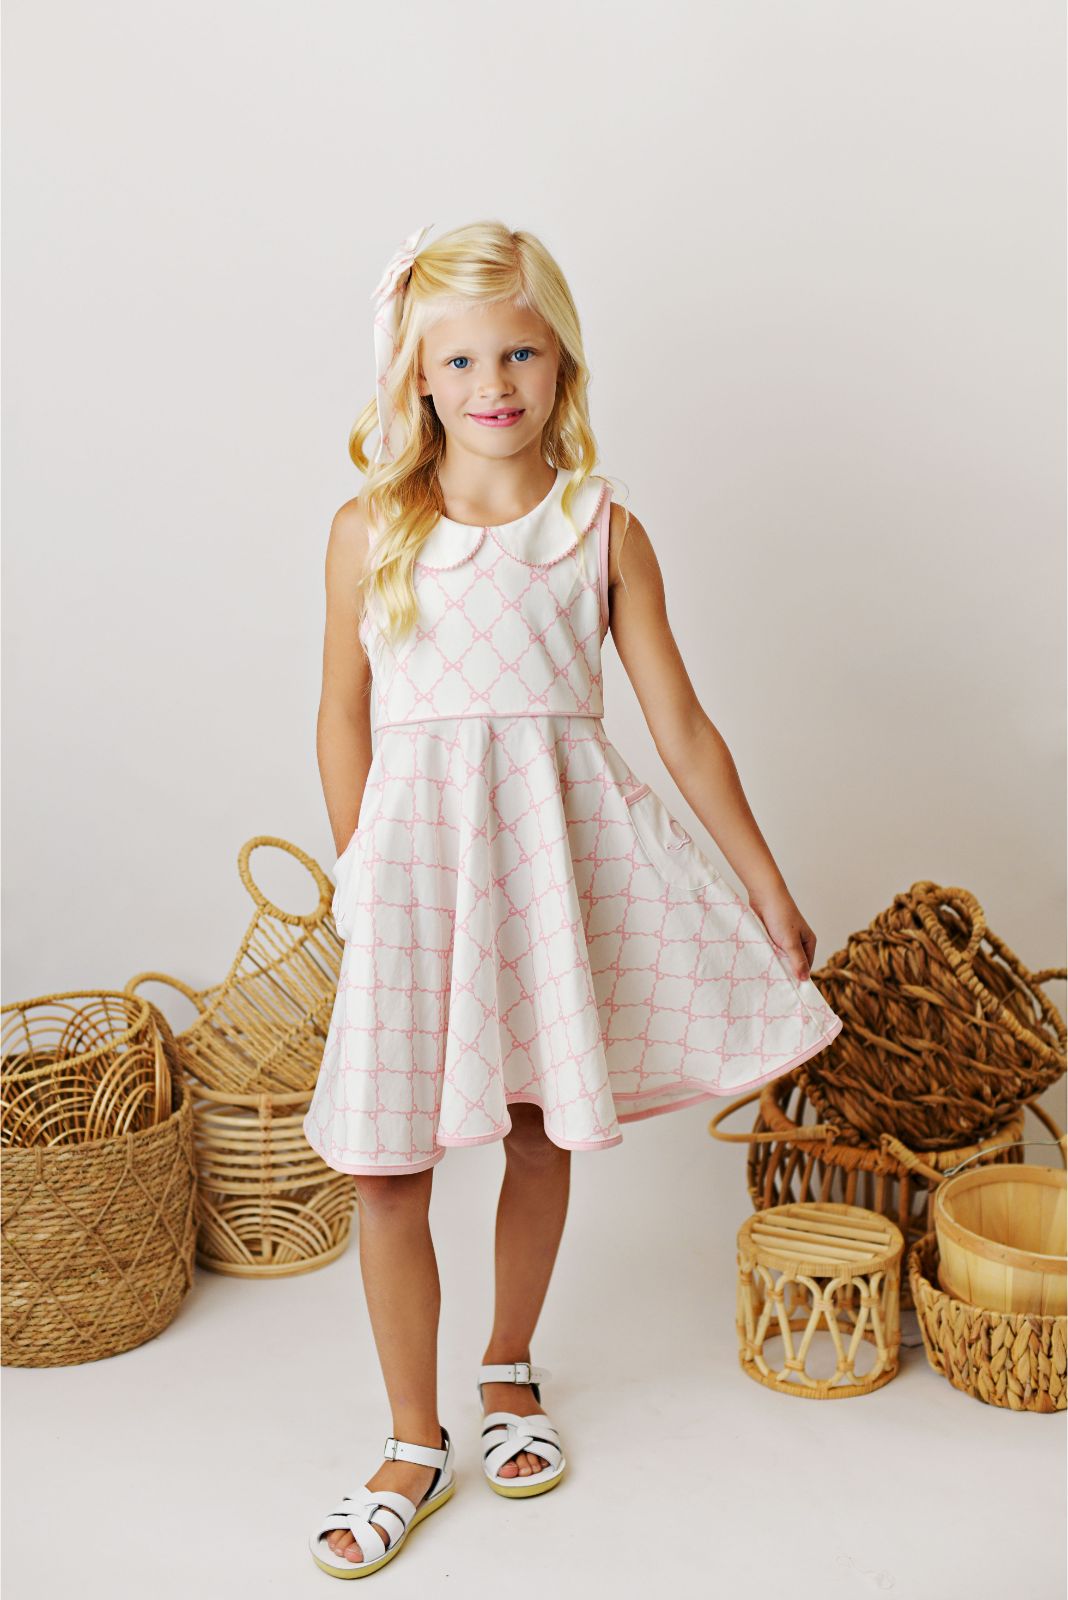 Swoon Baby Bows N' Berries Proper Picot Pocket Dress Style 23-60